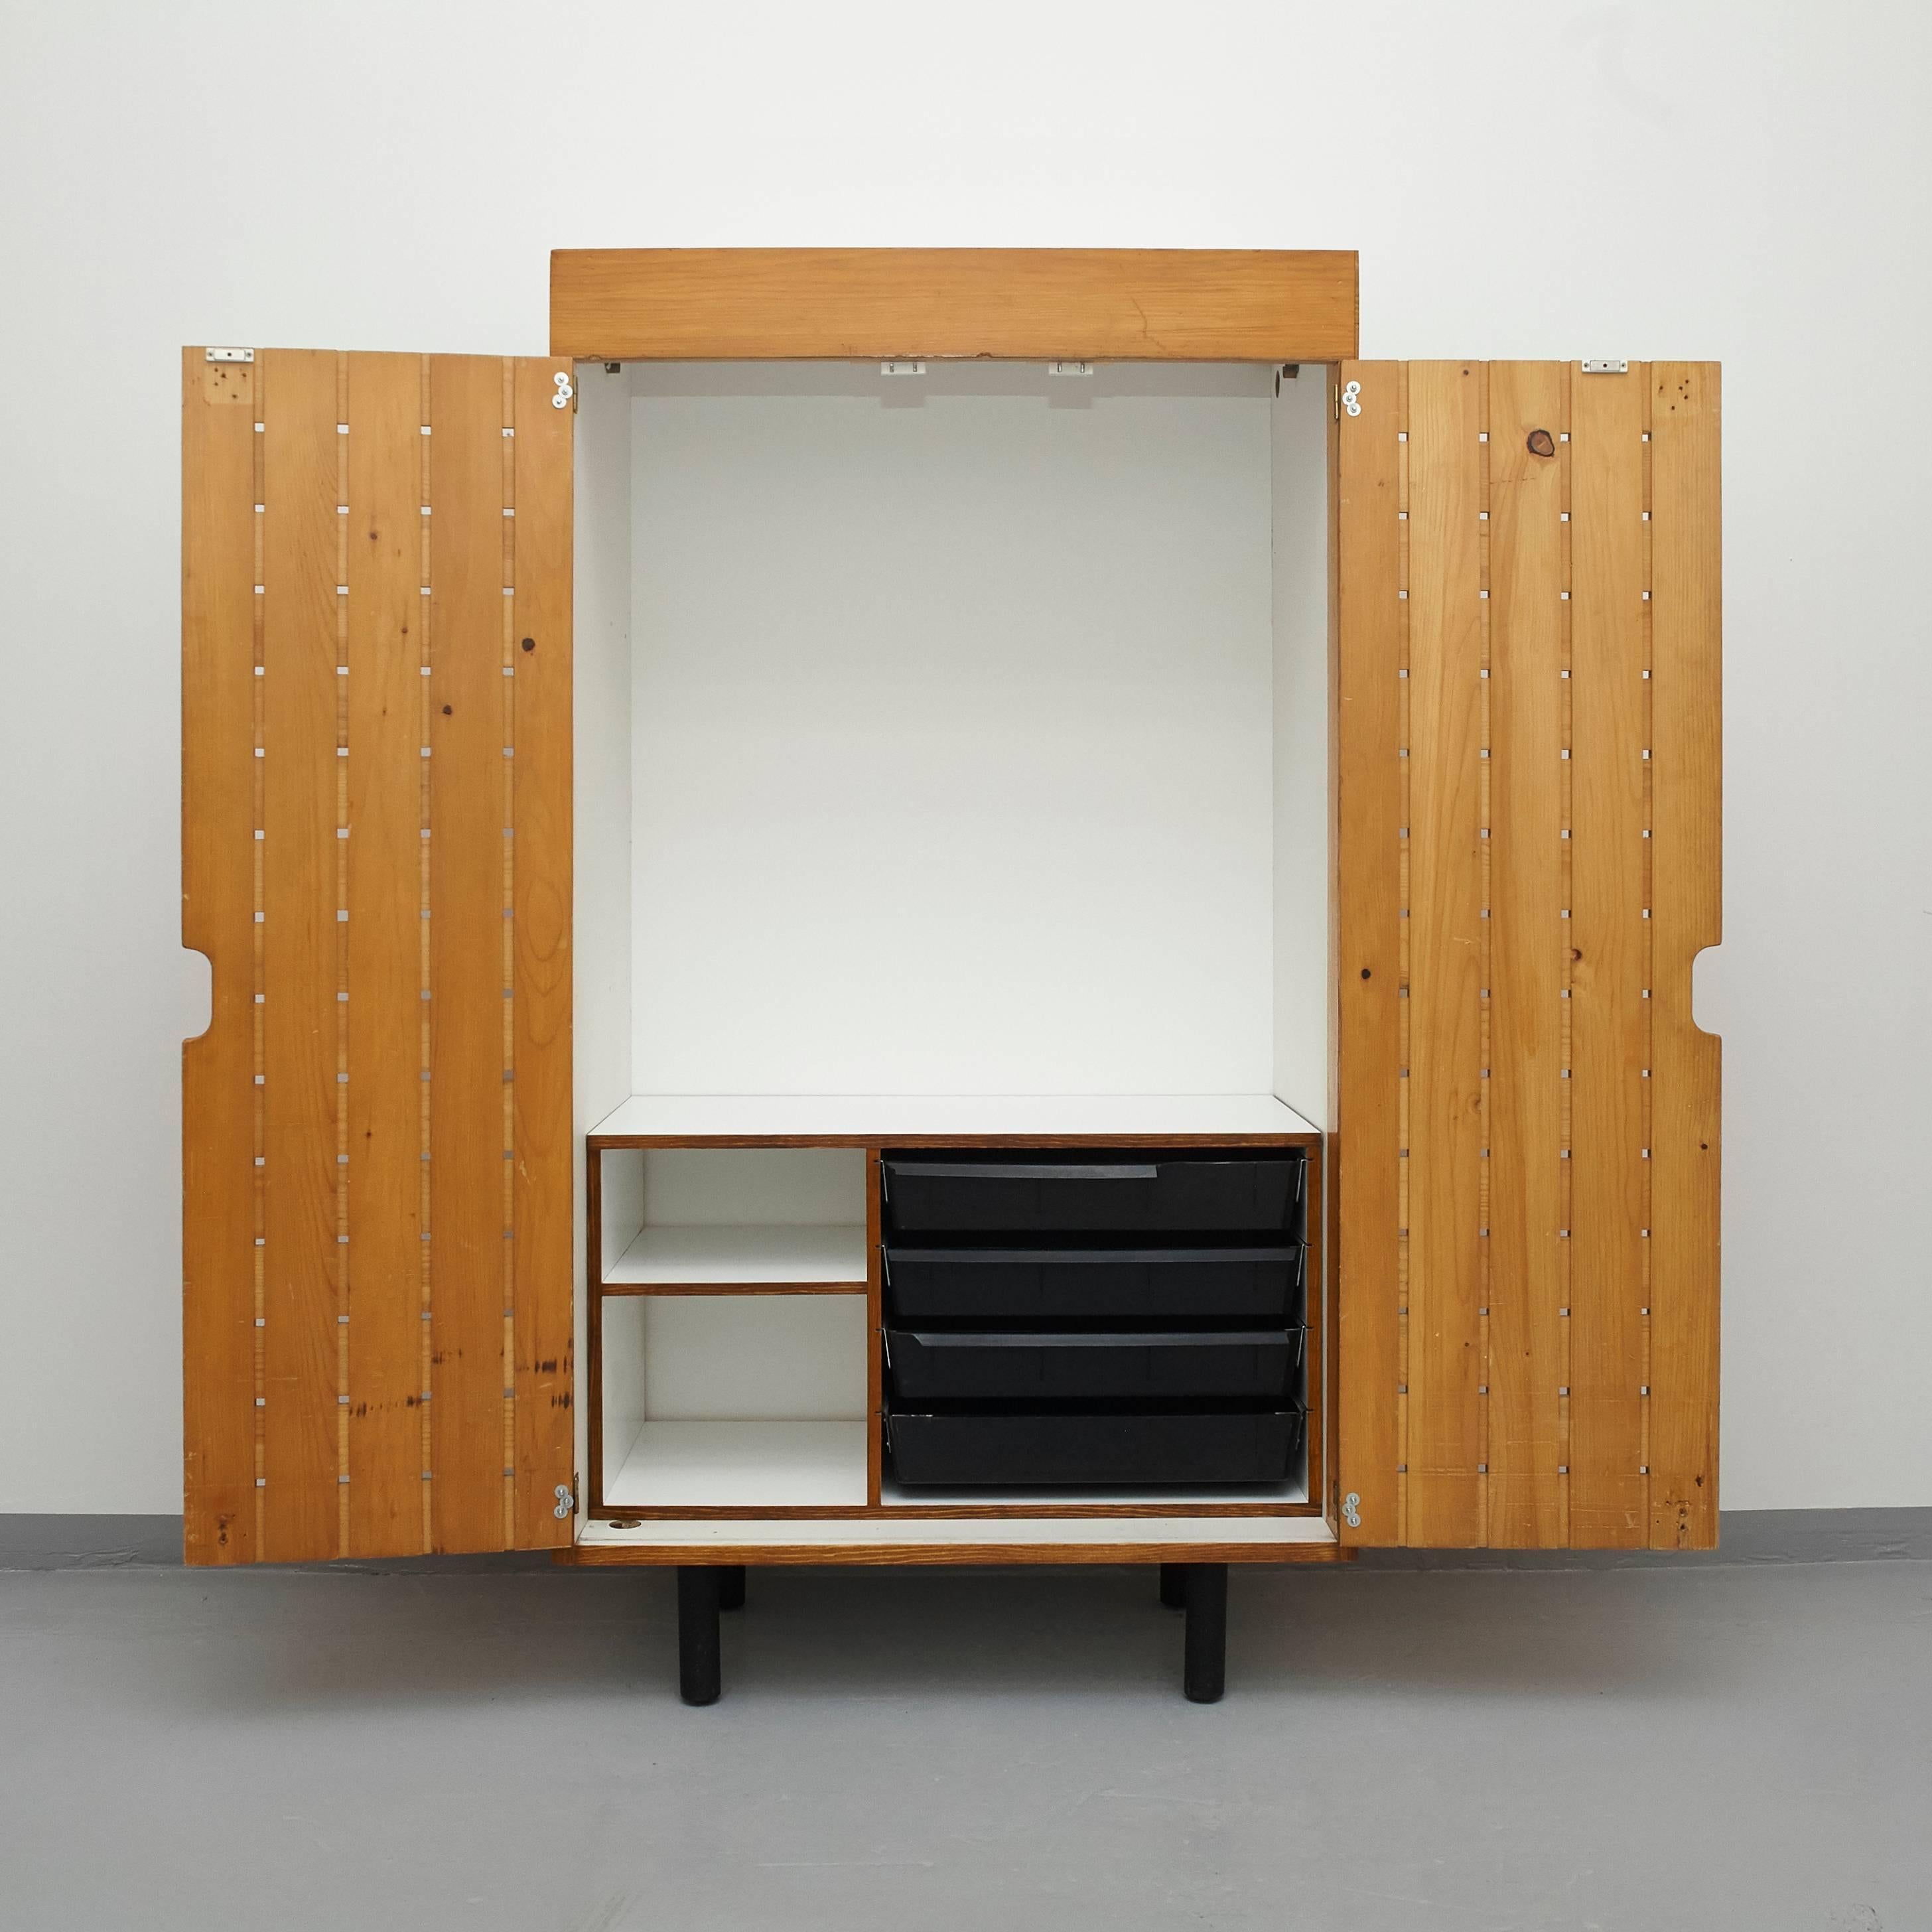 Wardrobe designed by Charlotte Perriand for Les Arks in France, circa 1960.

Pine wood and metal base and plastic drawers.

Part of the plastic drawers are missing as you can see on the photos.

In original condition, with wear consistent with